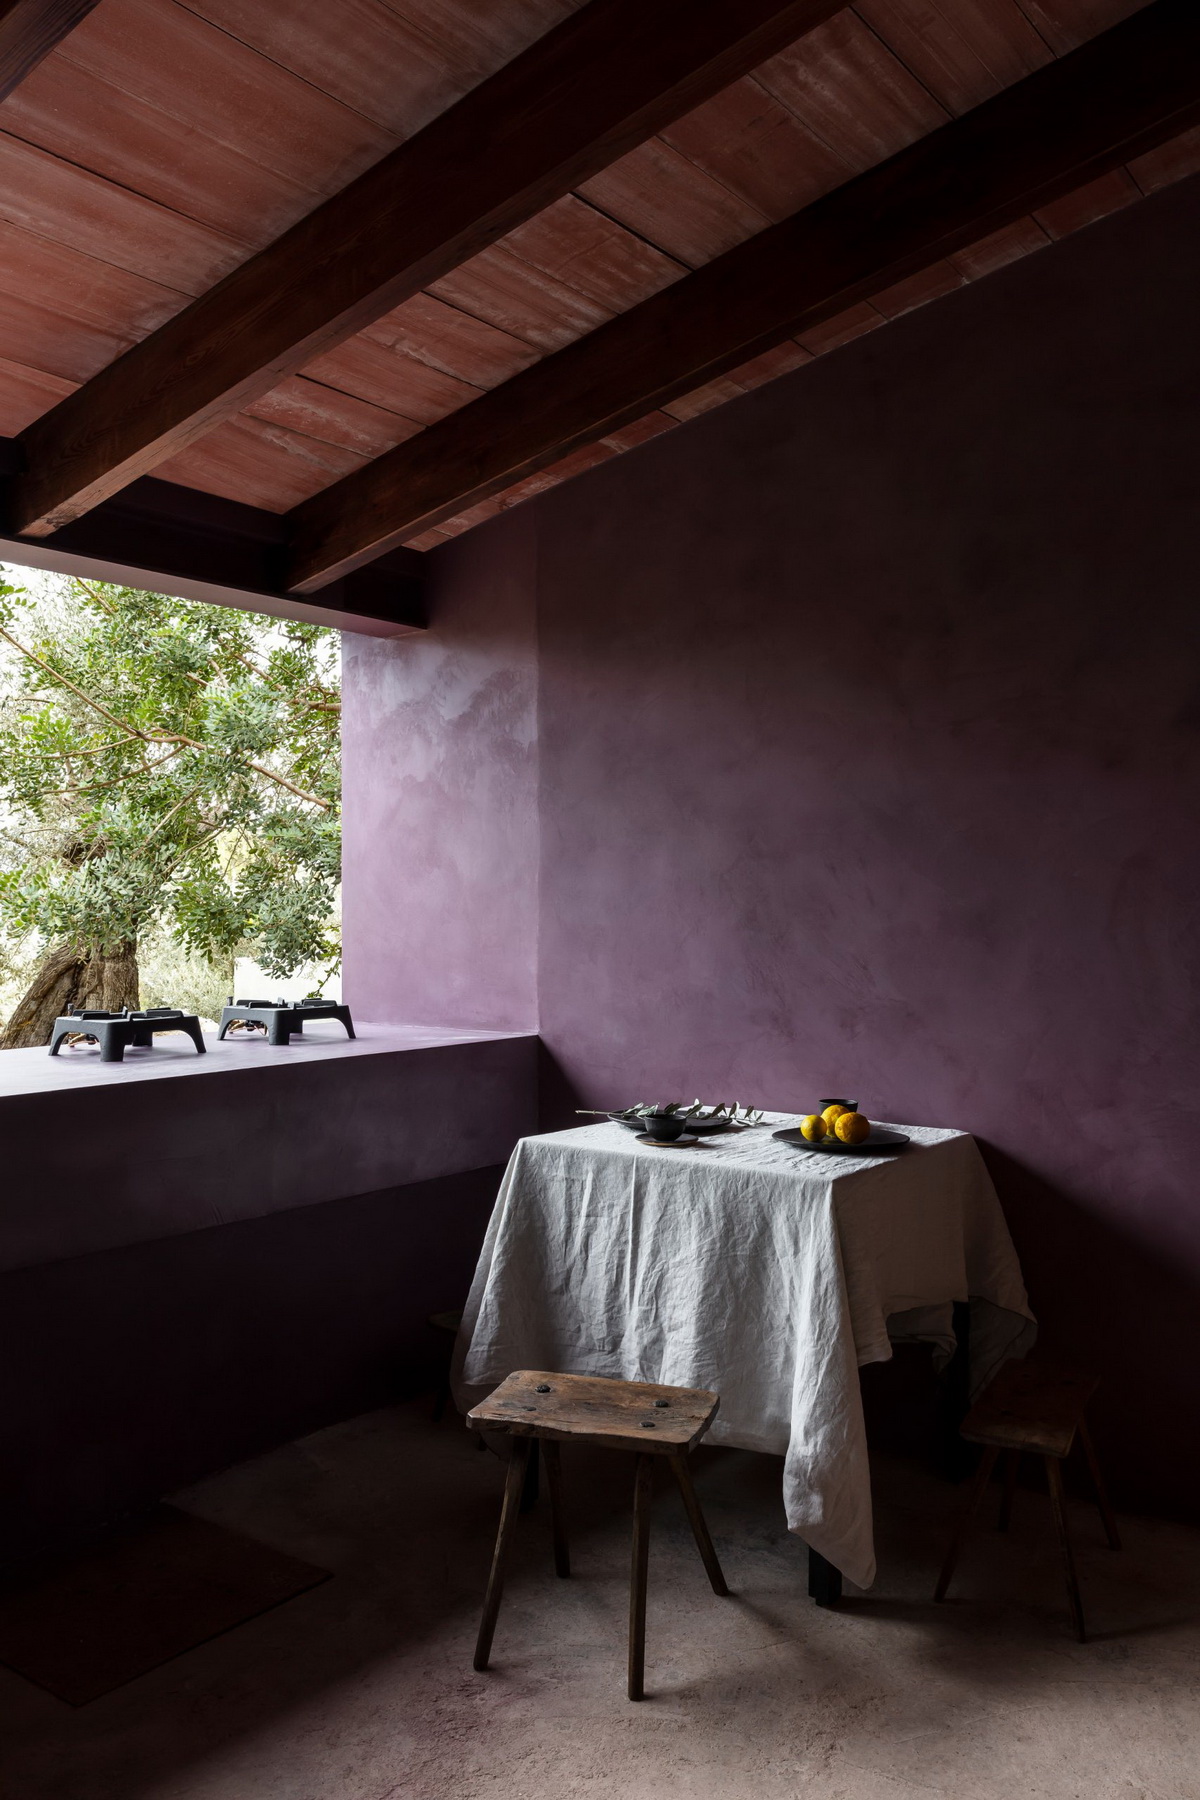 olive-houses-interiors-spain-mar-plus-ask-architecture_dezeen_2364_col_11-scaled_调整大小.jpg